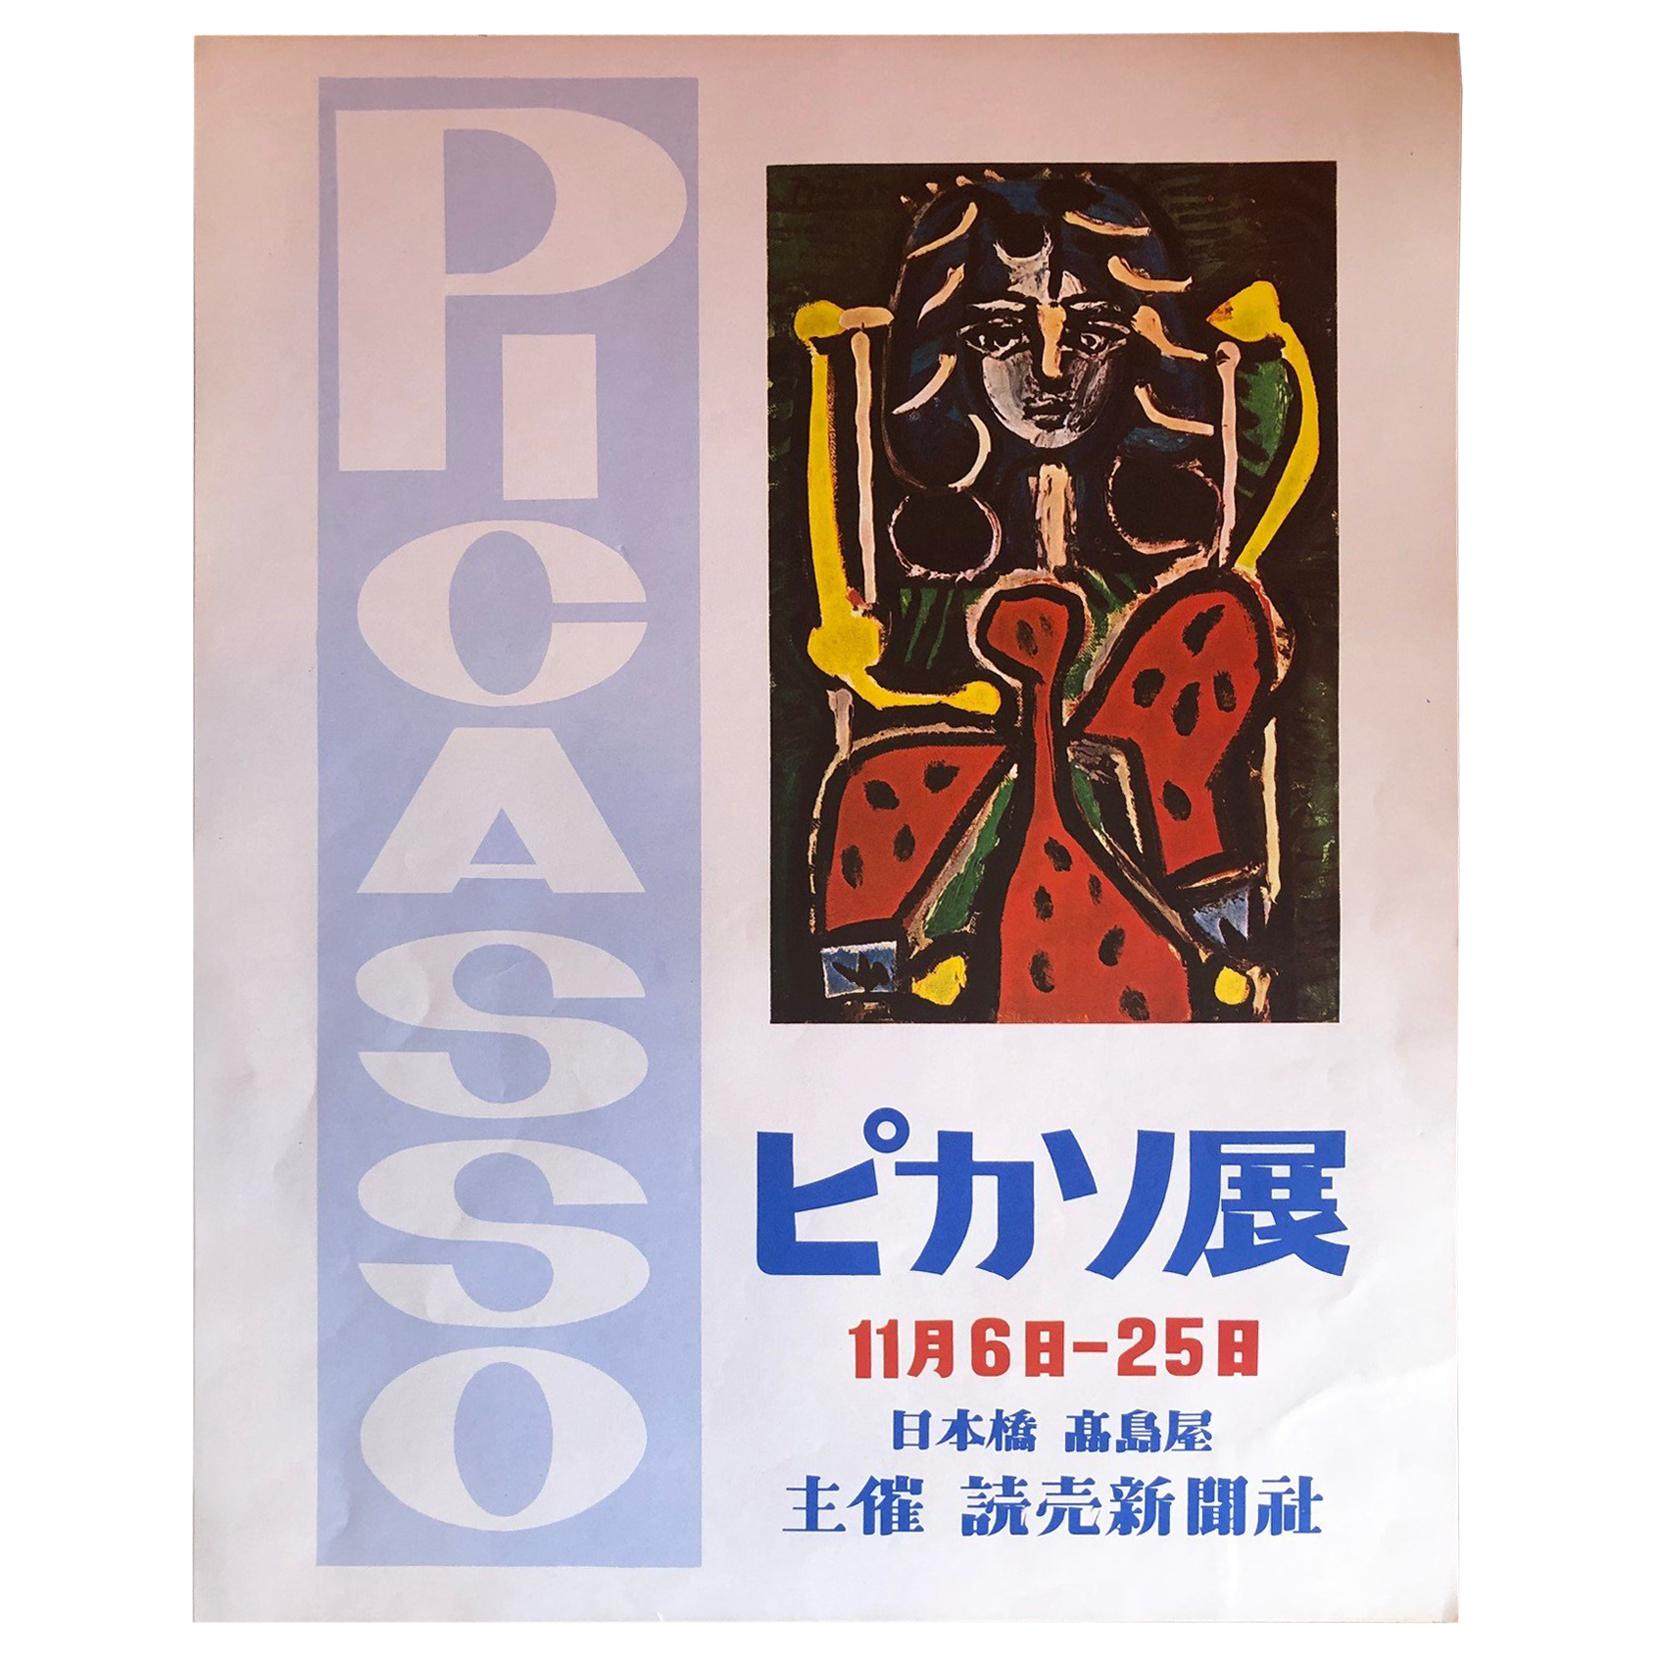 Midcentury Japanese Kanji Lettering Poster of Pablo Picasso's Exhibition